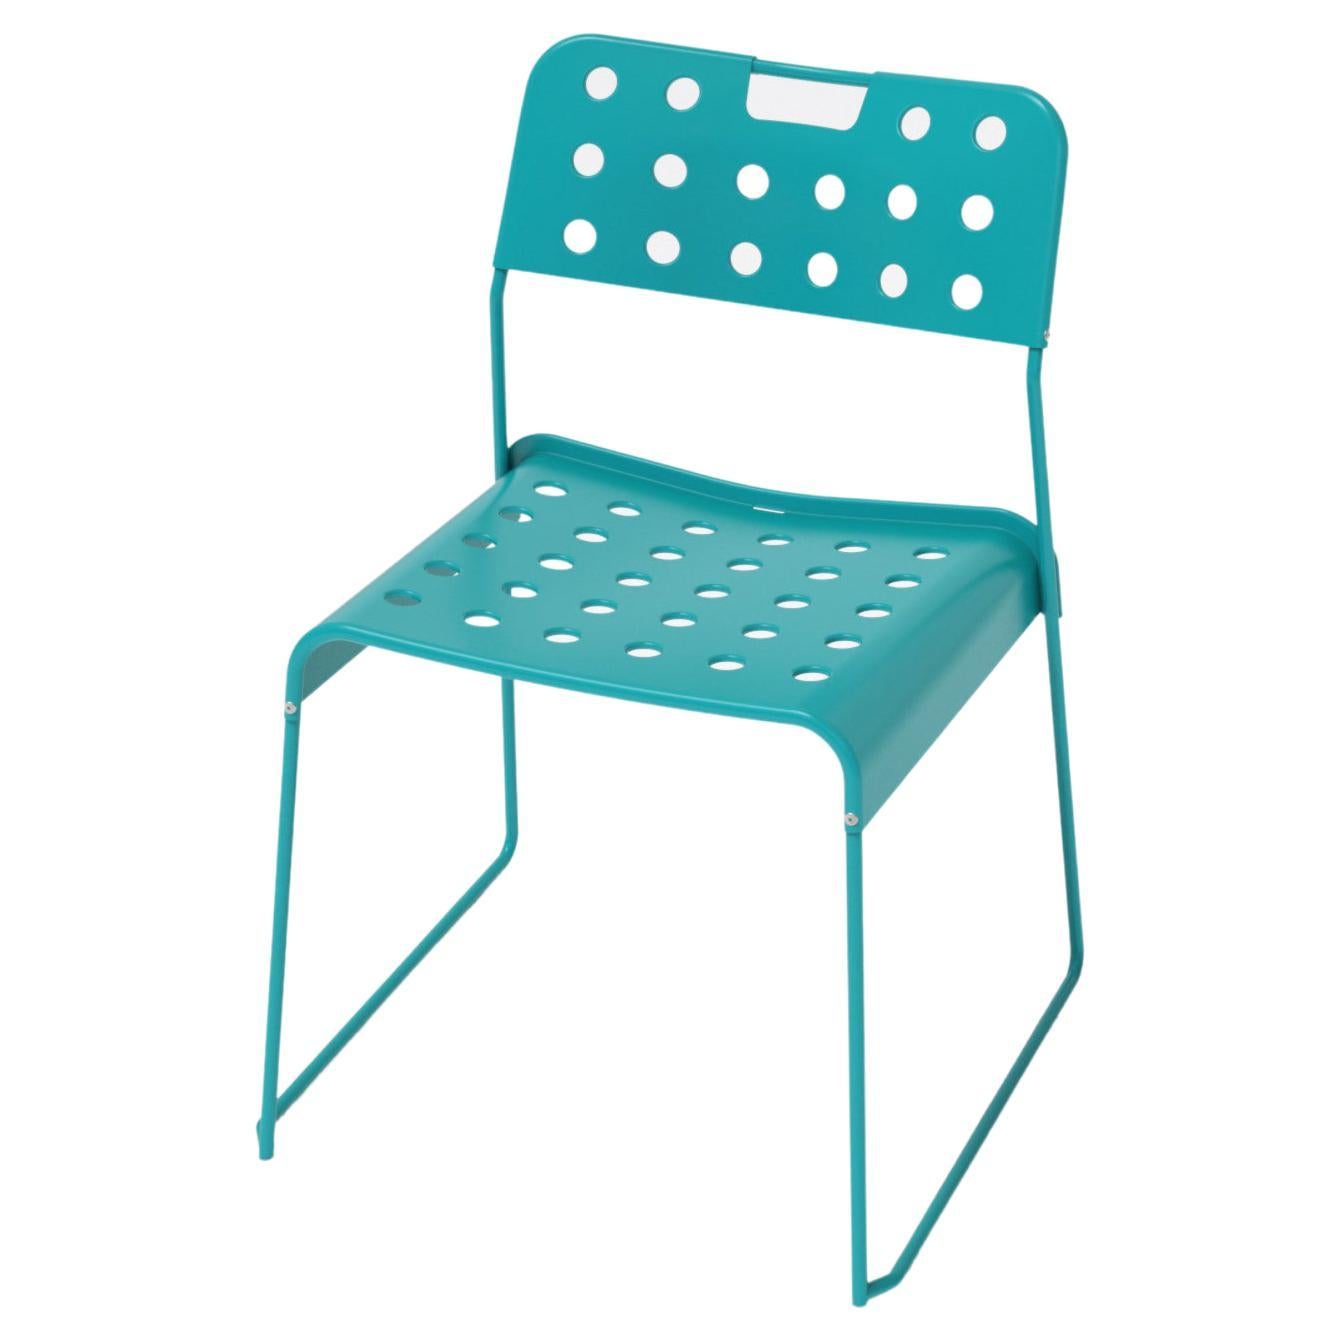 Omkstak, Stacking Chair, RAL 5018 Turquoise Blue For Sale